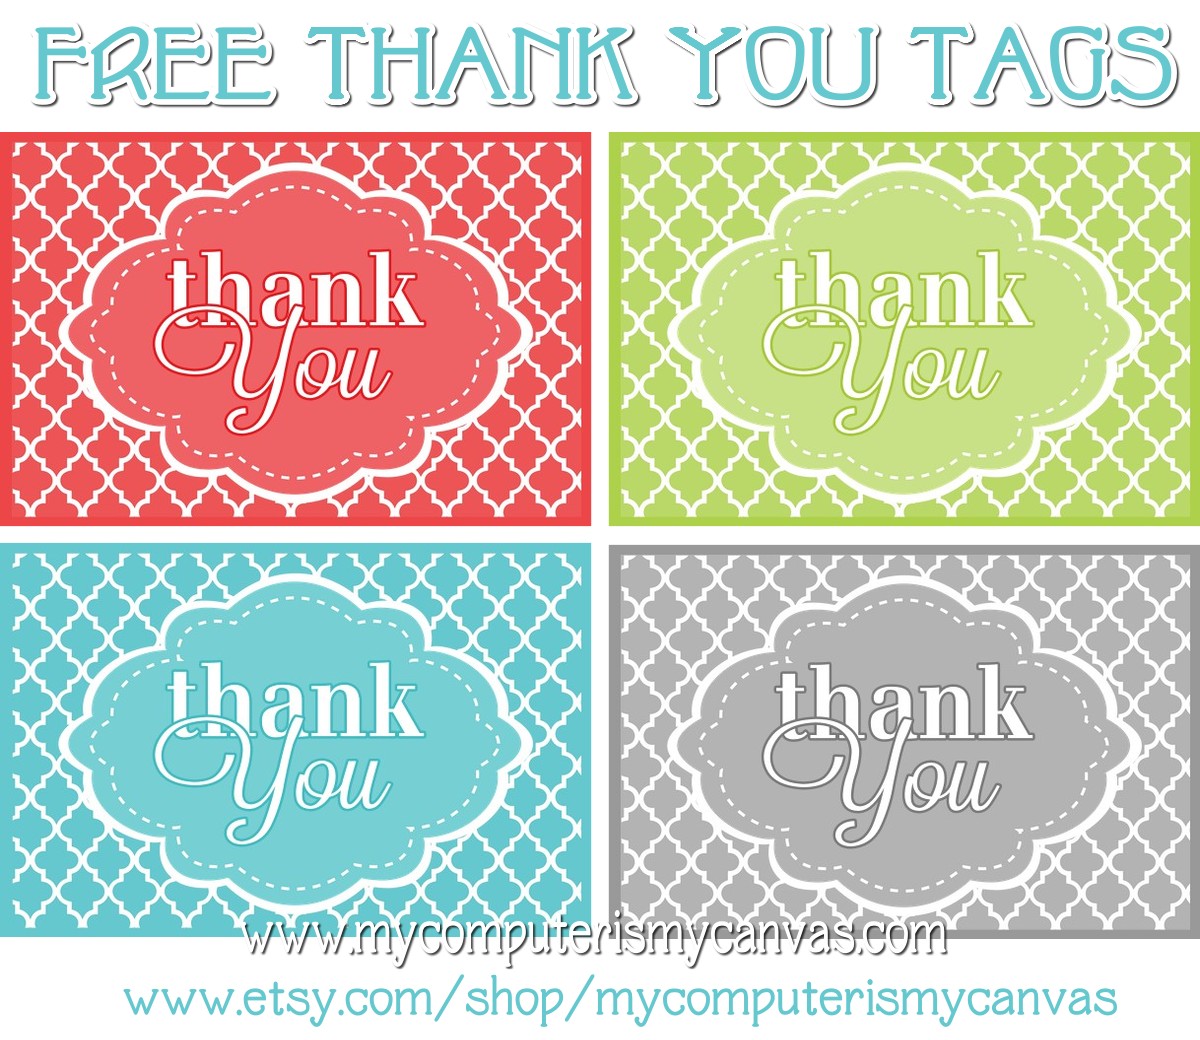 My Computer is My Canvas: {FREEBIE} PRINTABLE THANK YOU TAGS